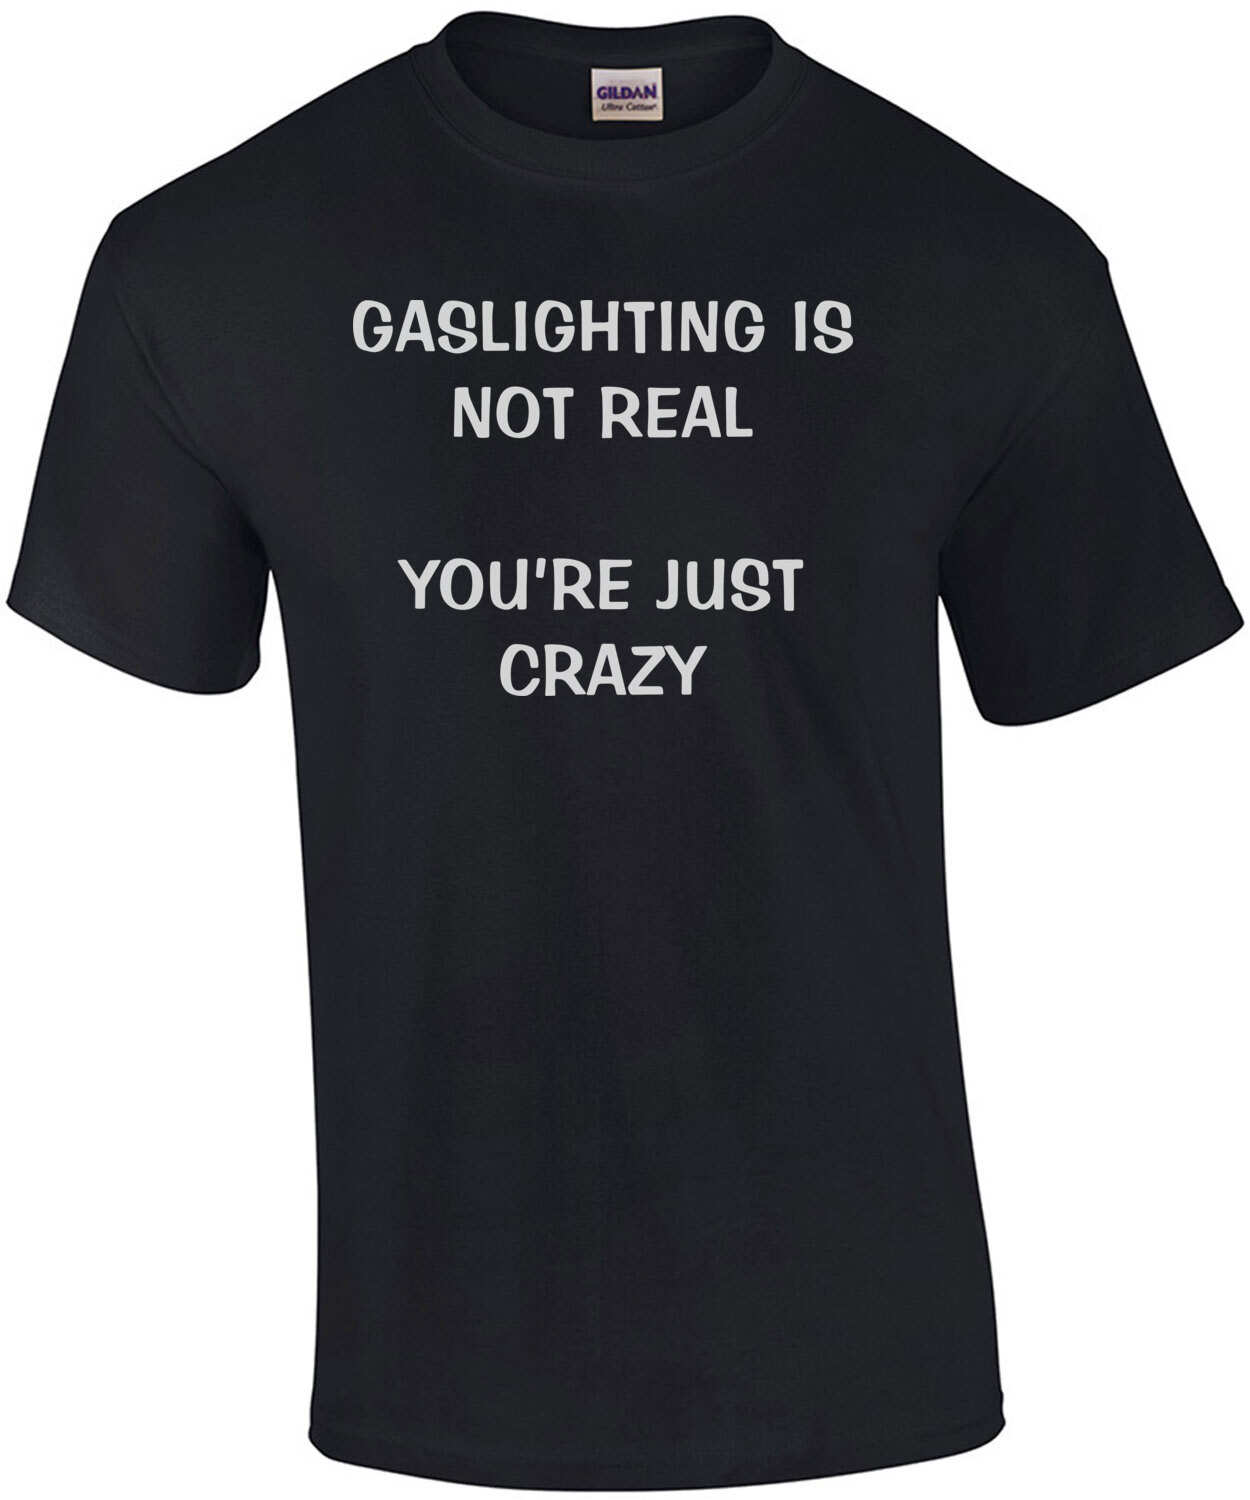 Gaslighting is not real. You're just crazy T-Shirt